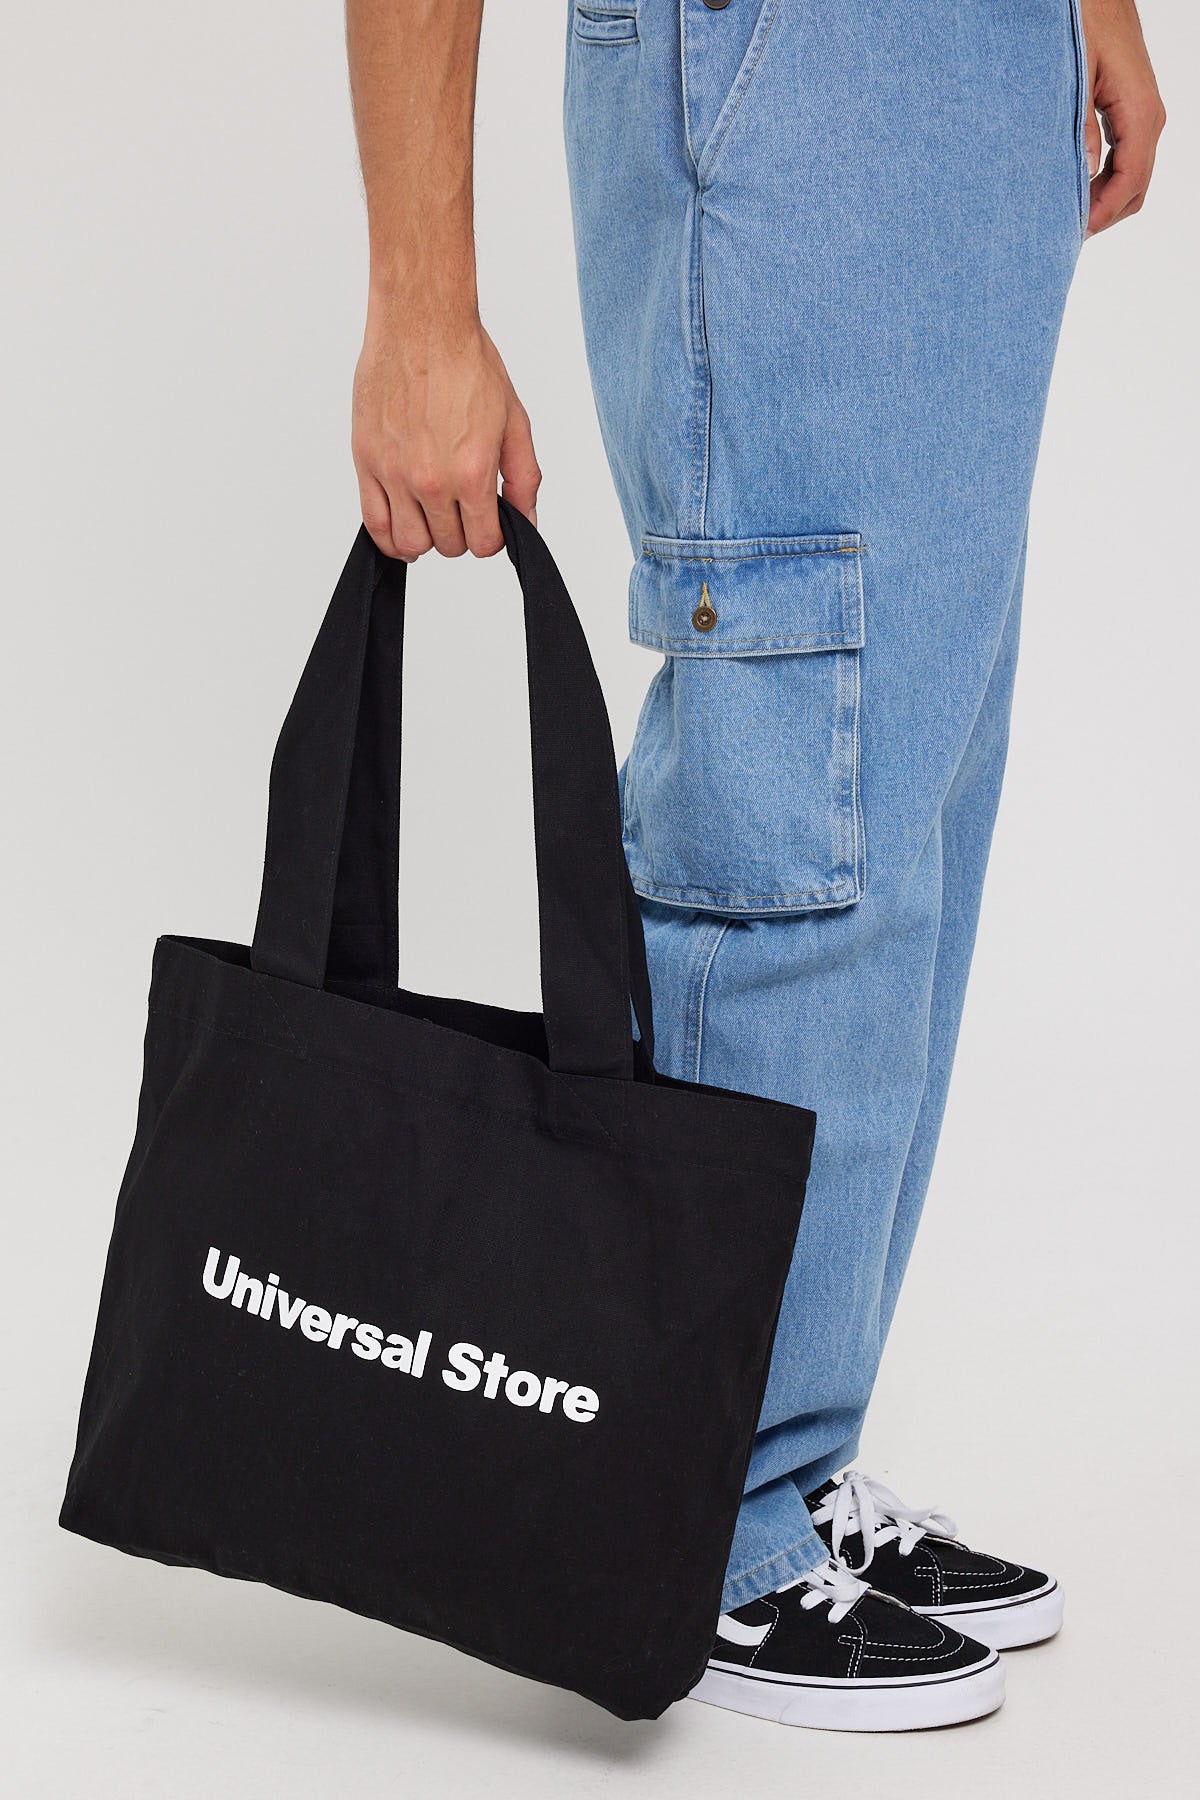 Universal Store Universal Store Small Recycled Tote Black